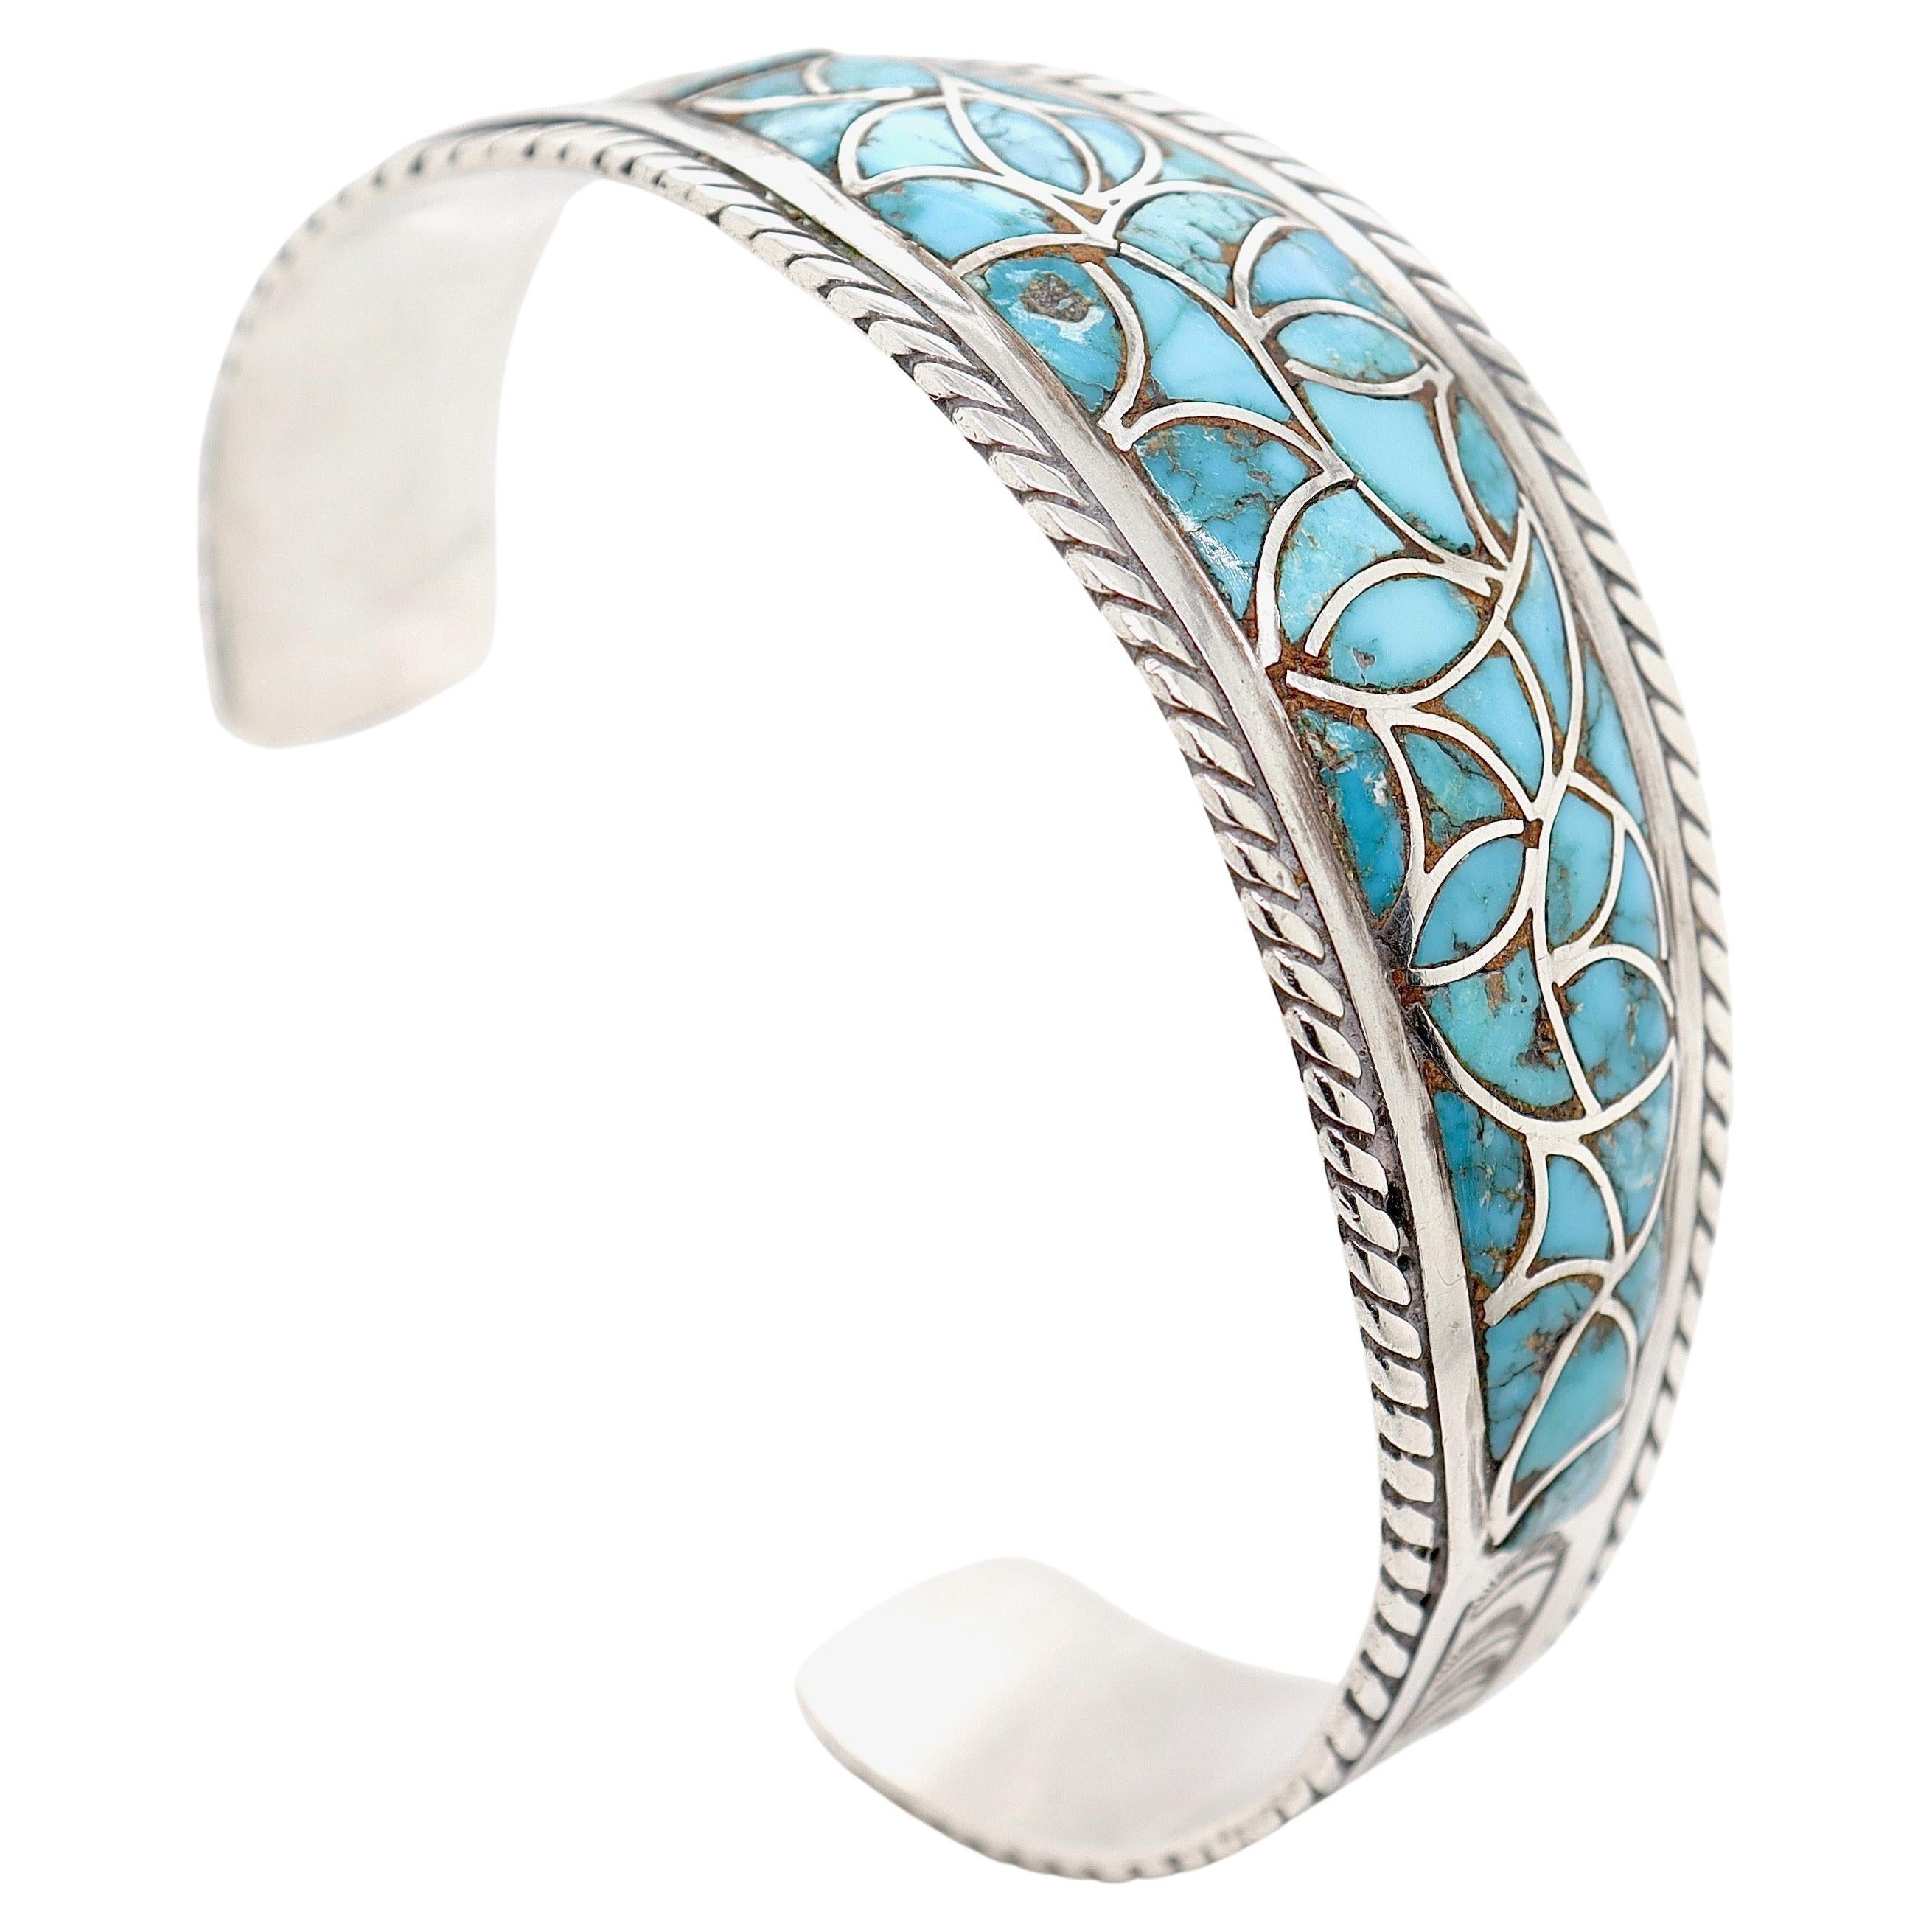 Vintage Old Pawn Navajo Silver & Turquoise Cuff Bracelet